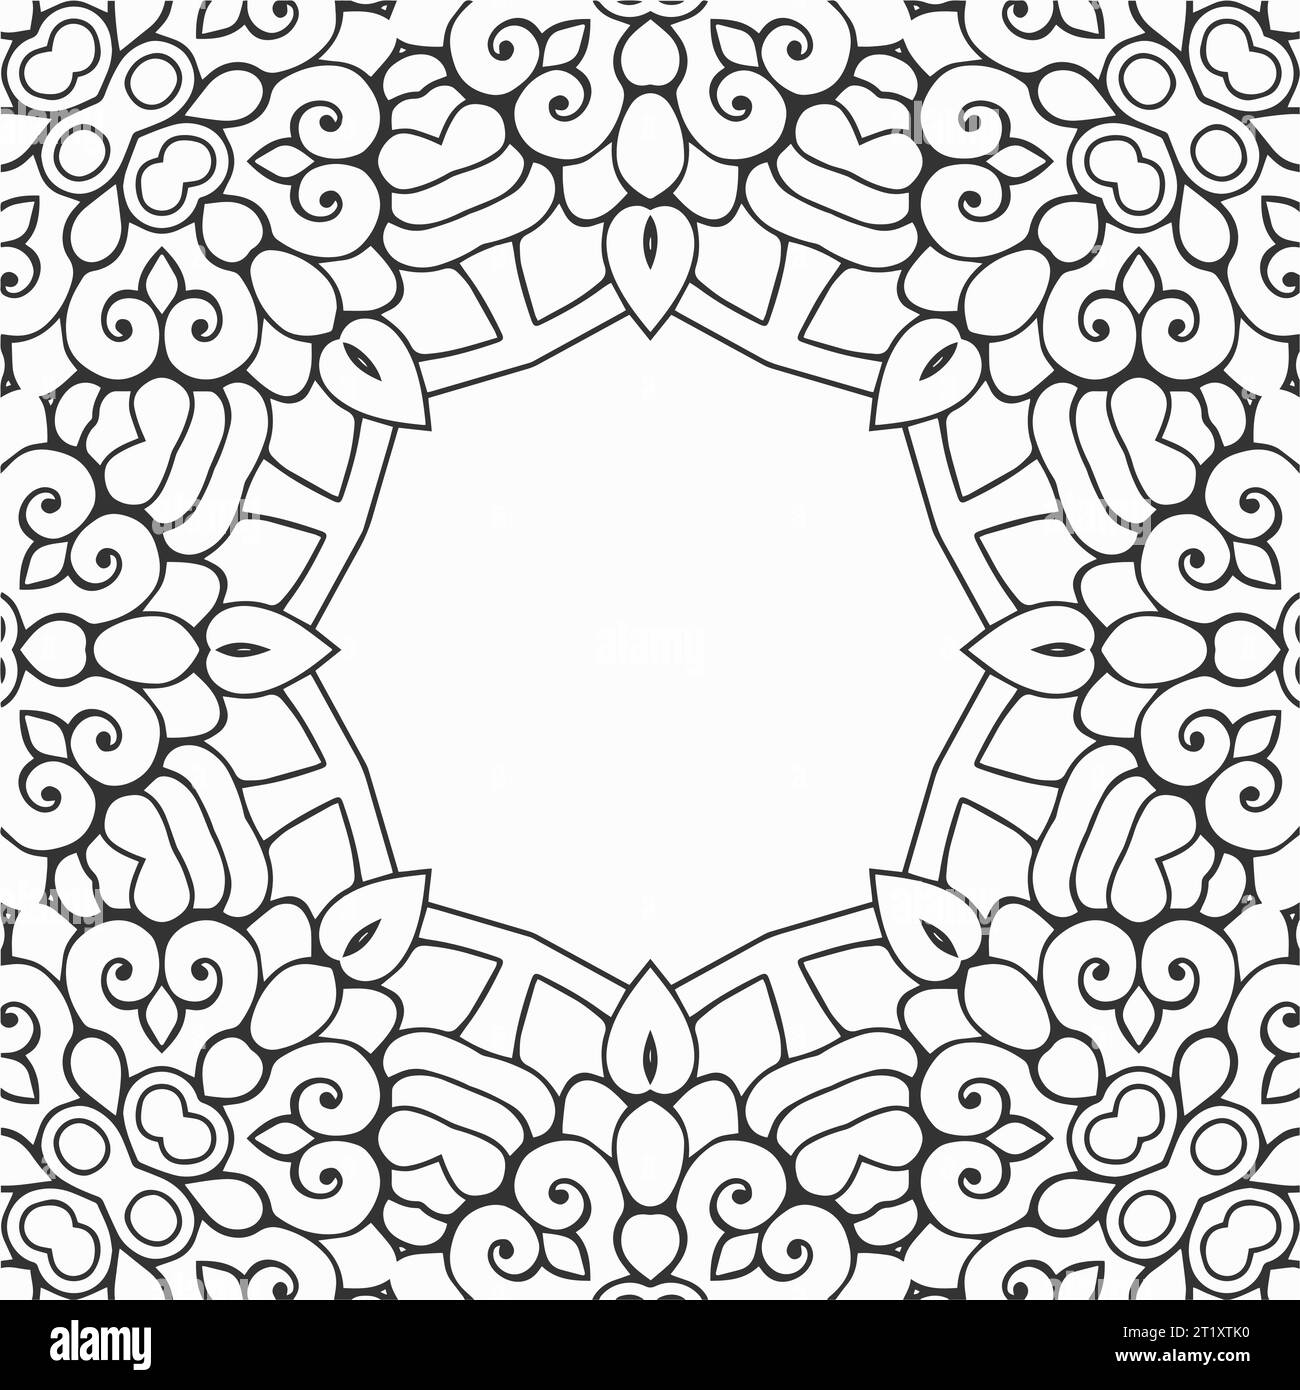 vector geometric pattern coloring page design Stock Vector